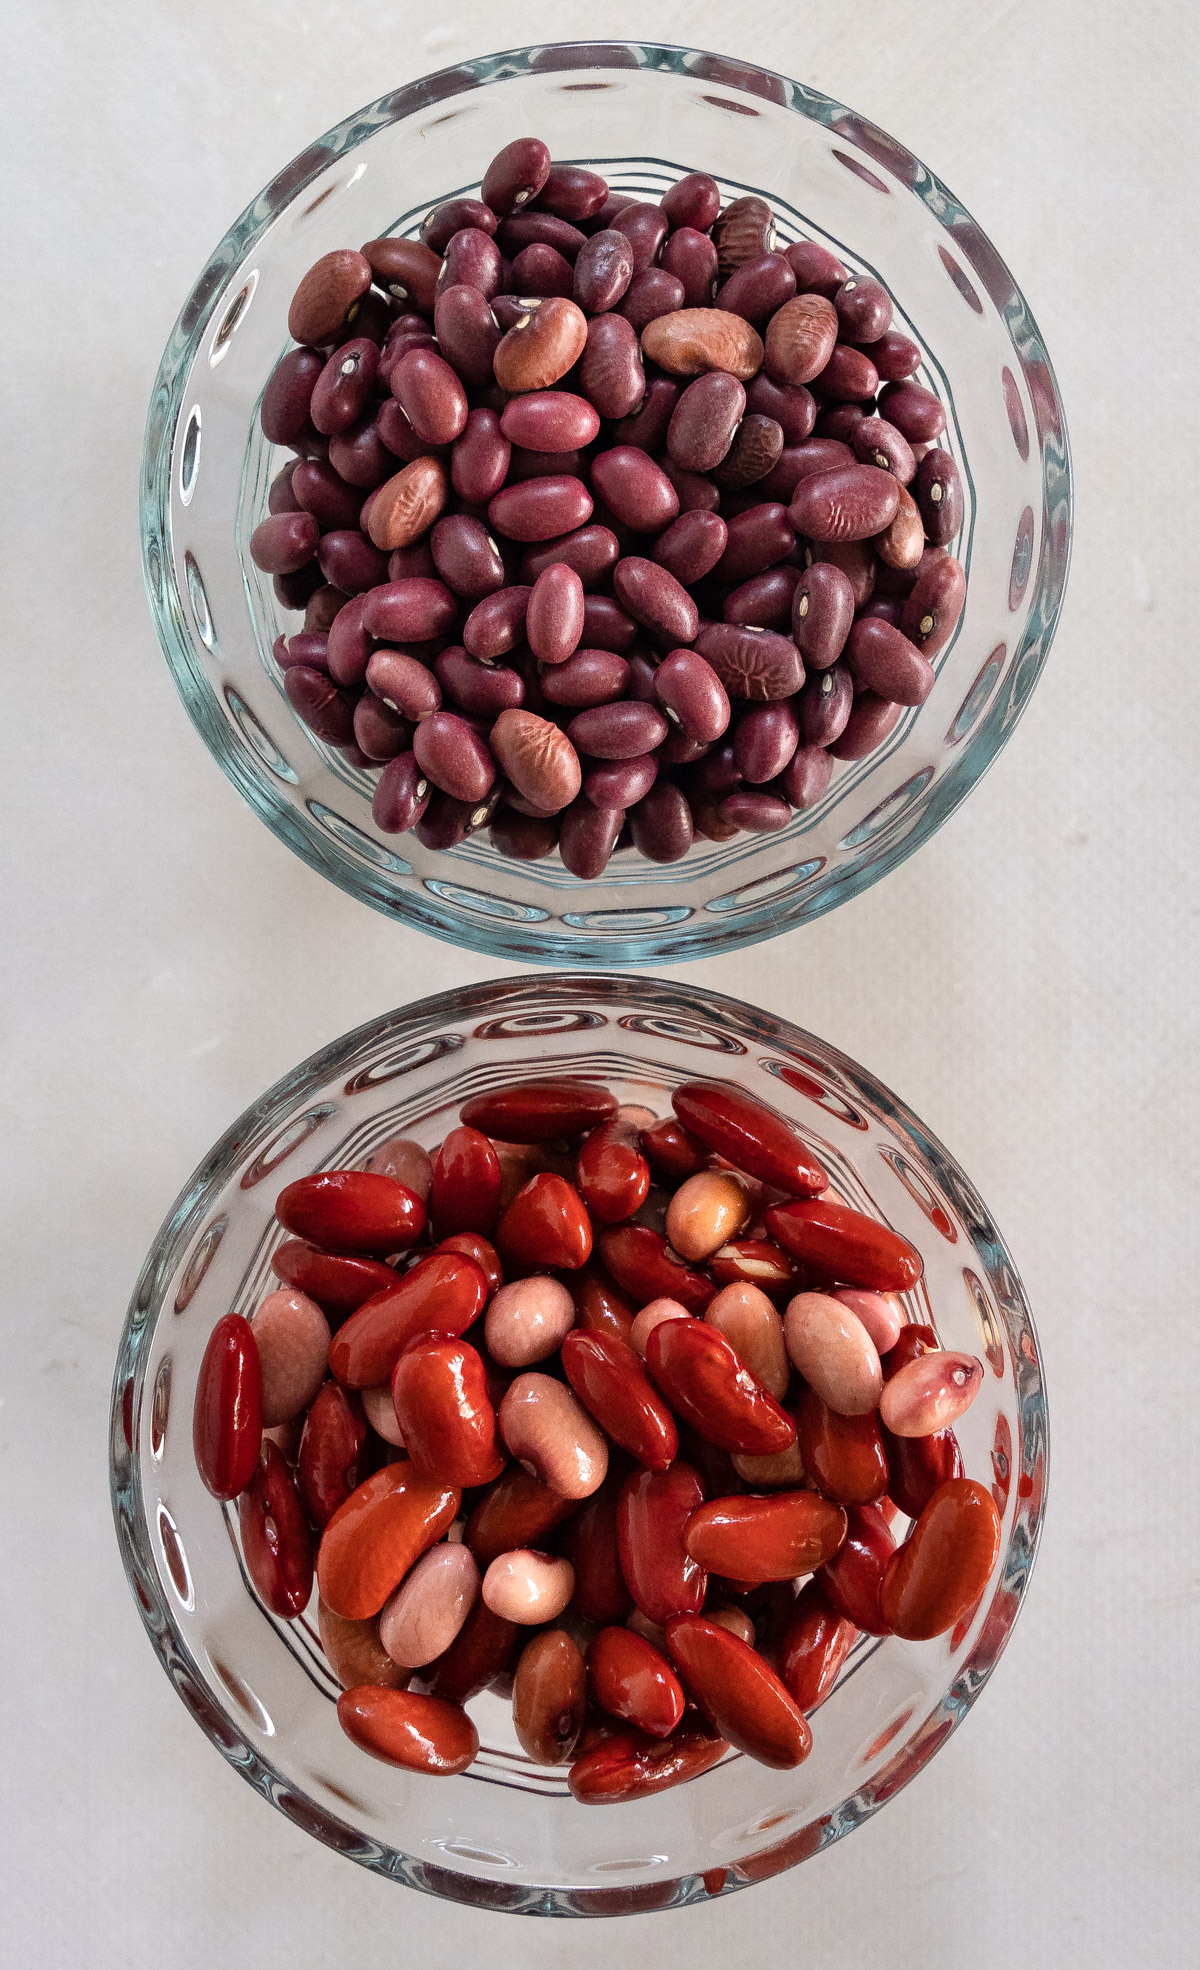 dry and wet red kidney beans in two bowls